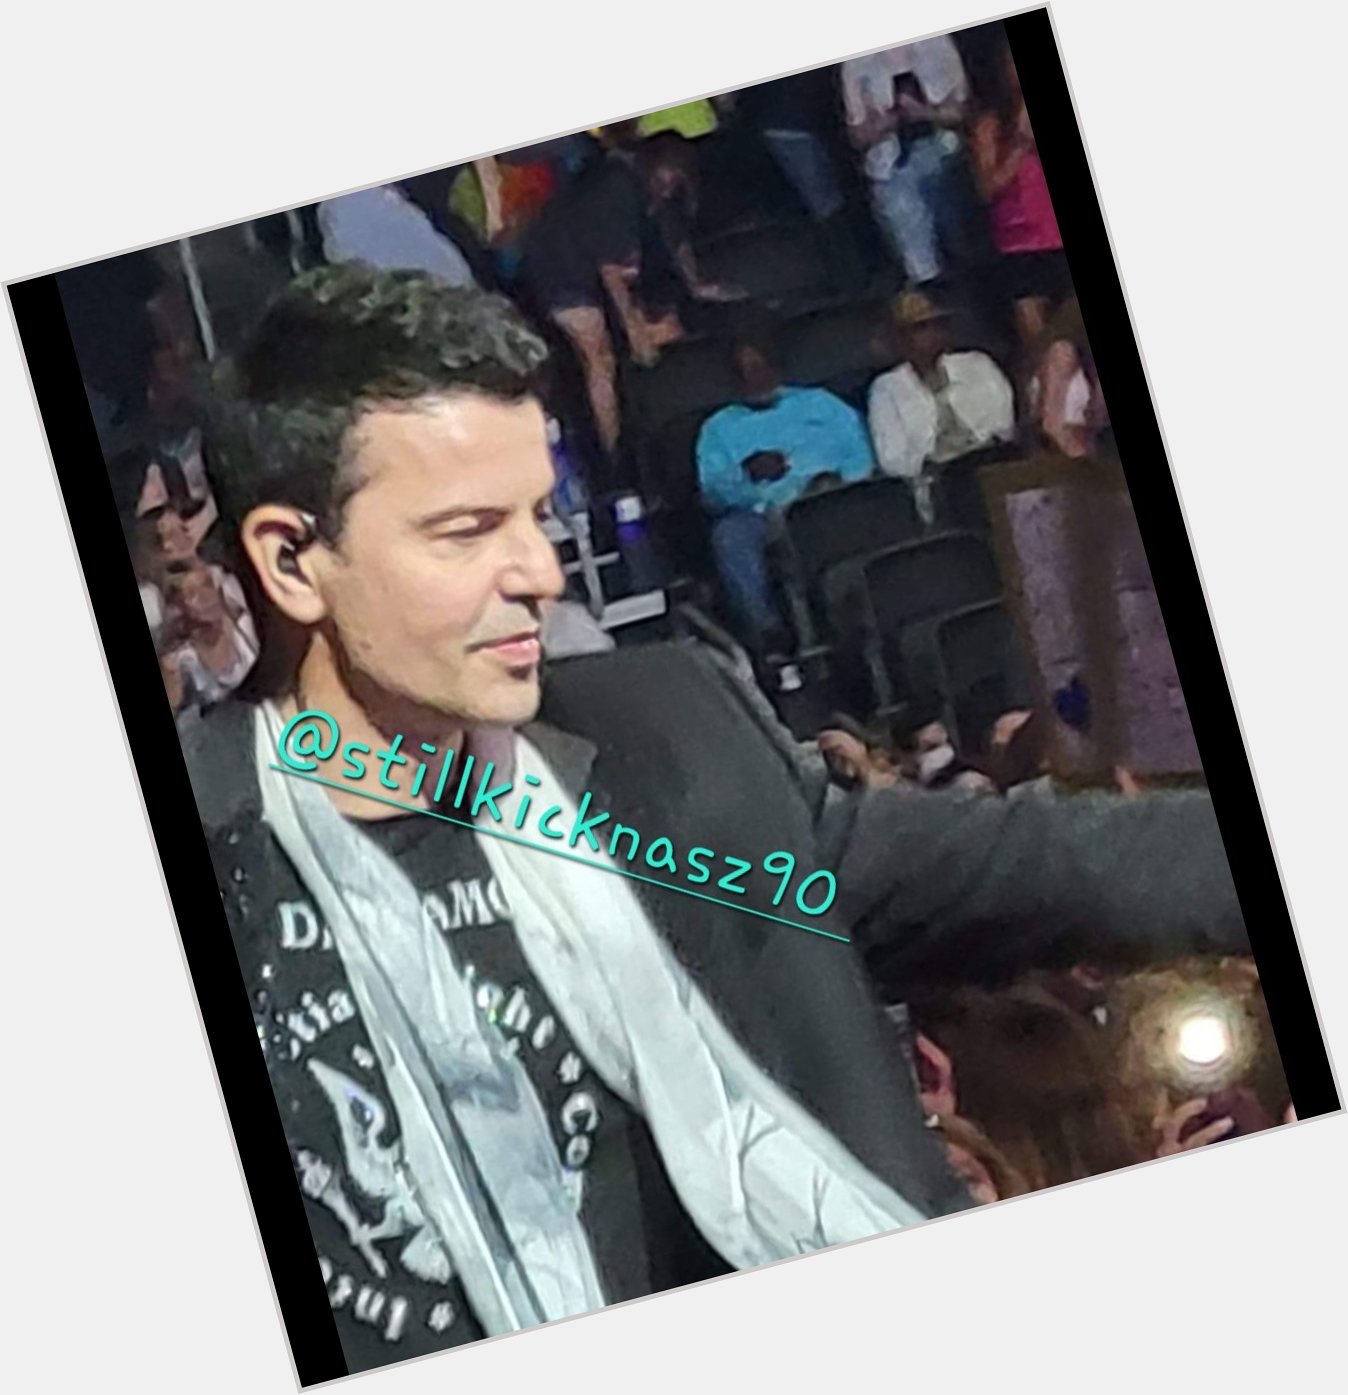 Happy birthday to Mr Jordan Knight from Hope you have the best birthday ever. Love ya!! 